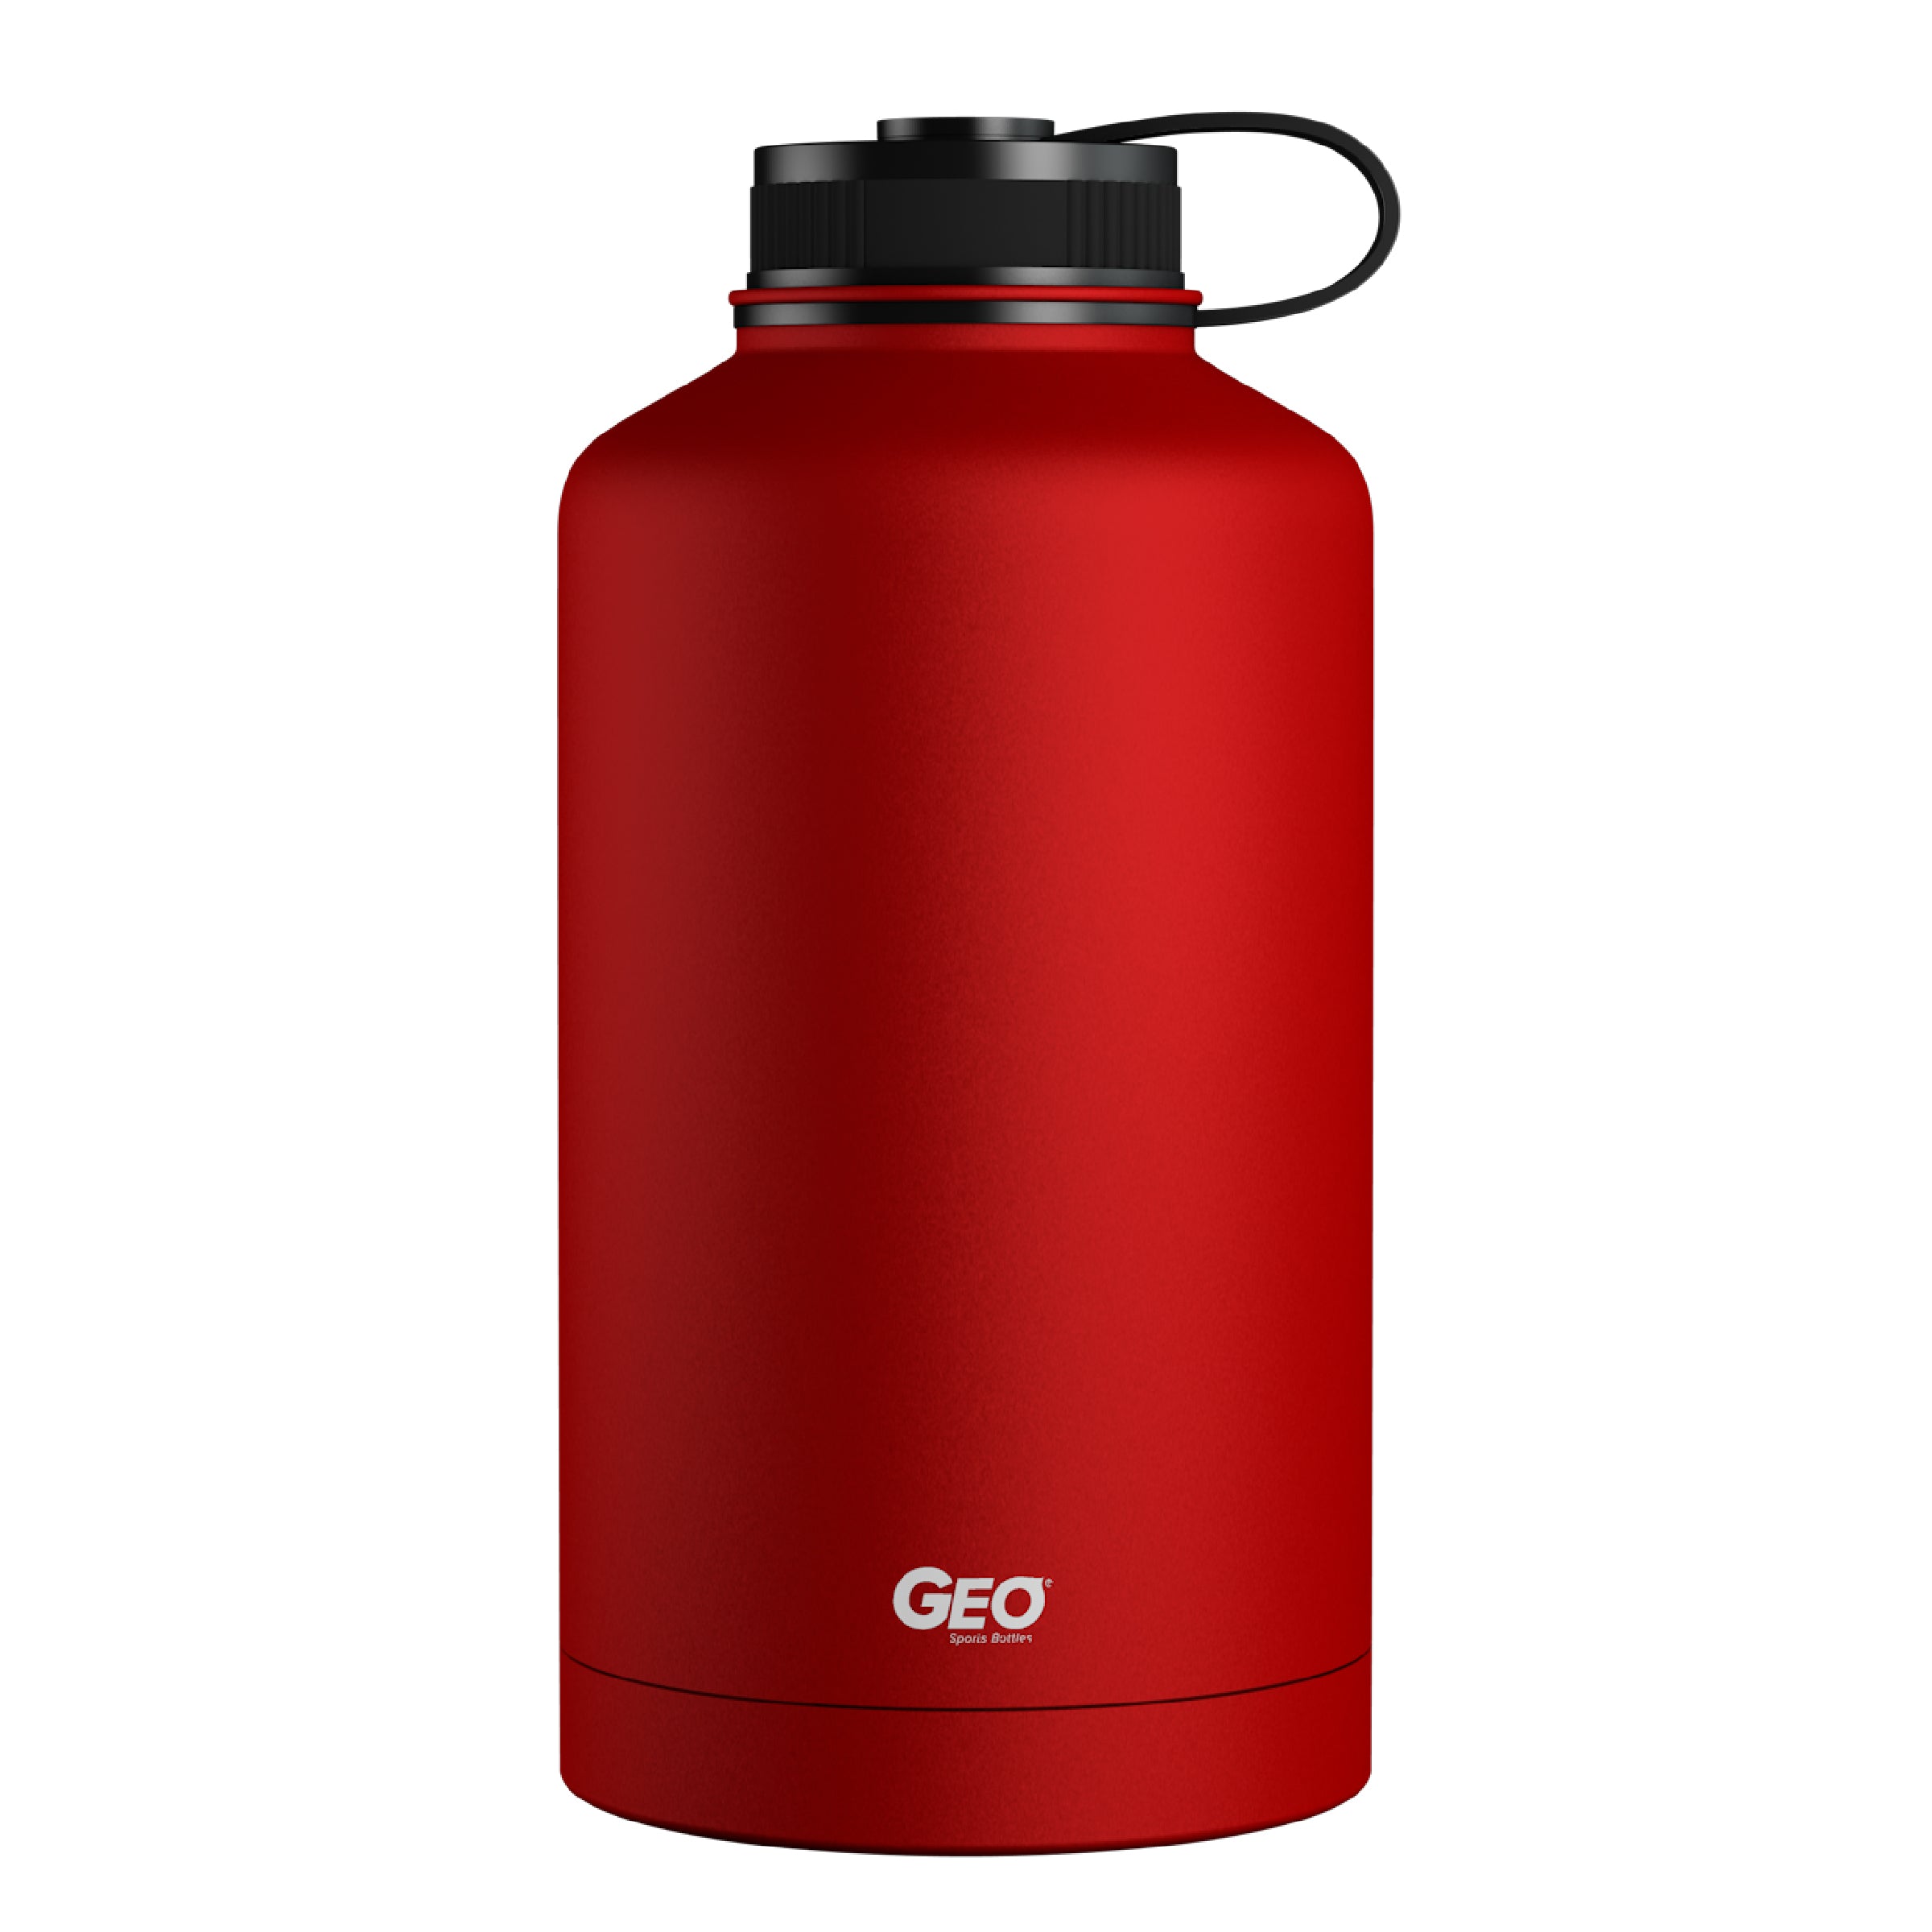 TAL Trek 64 oz Double Wall Insulated Growler and Thermos Slate Water Bottle  